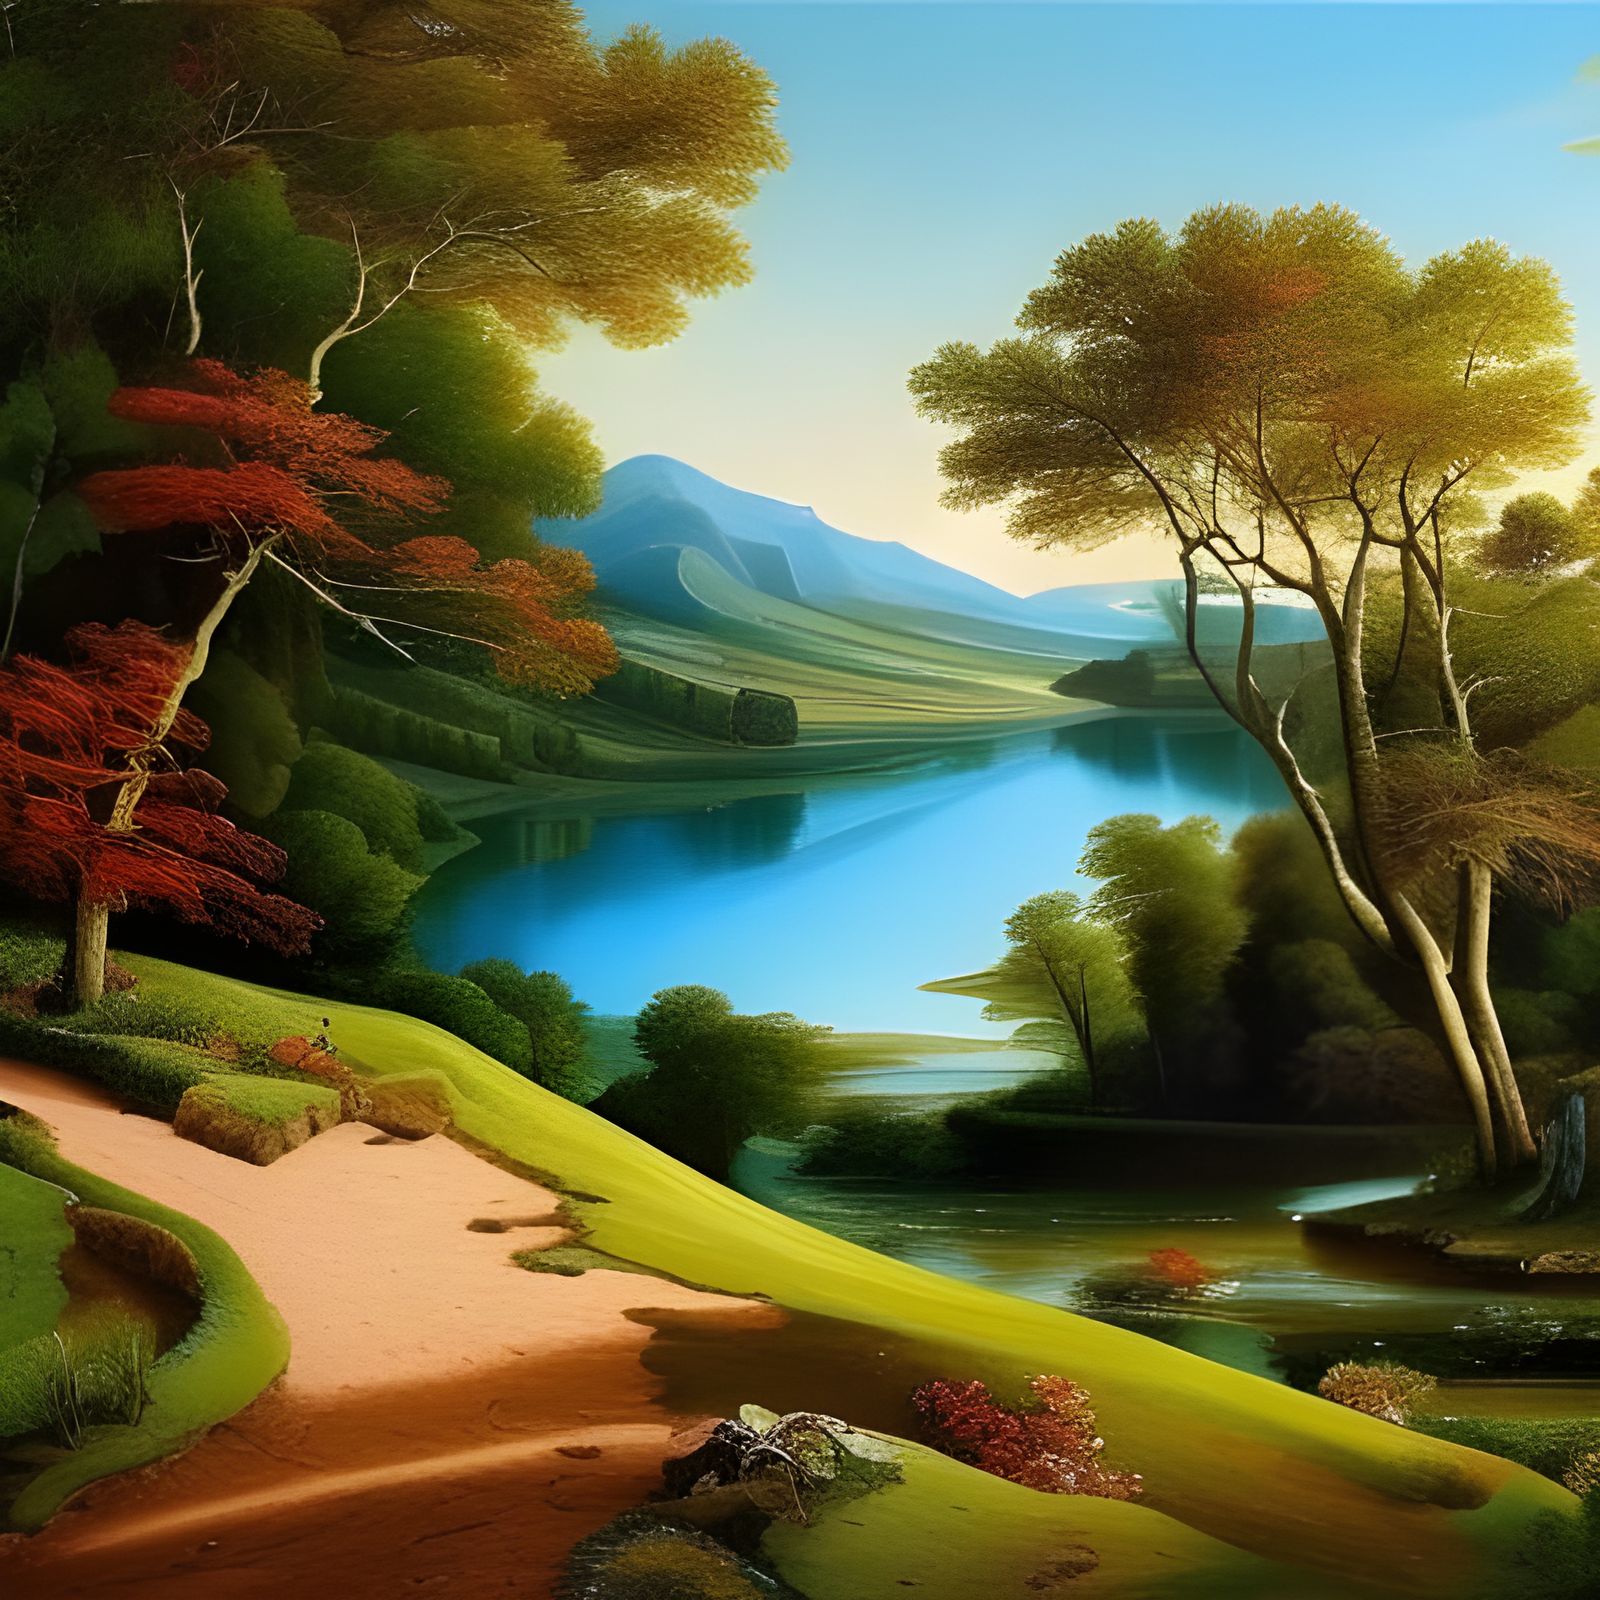 oil painting wallpaper hd